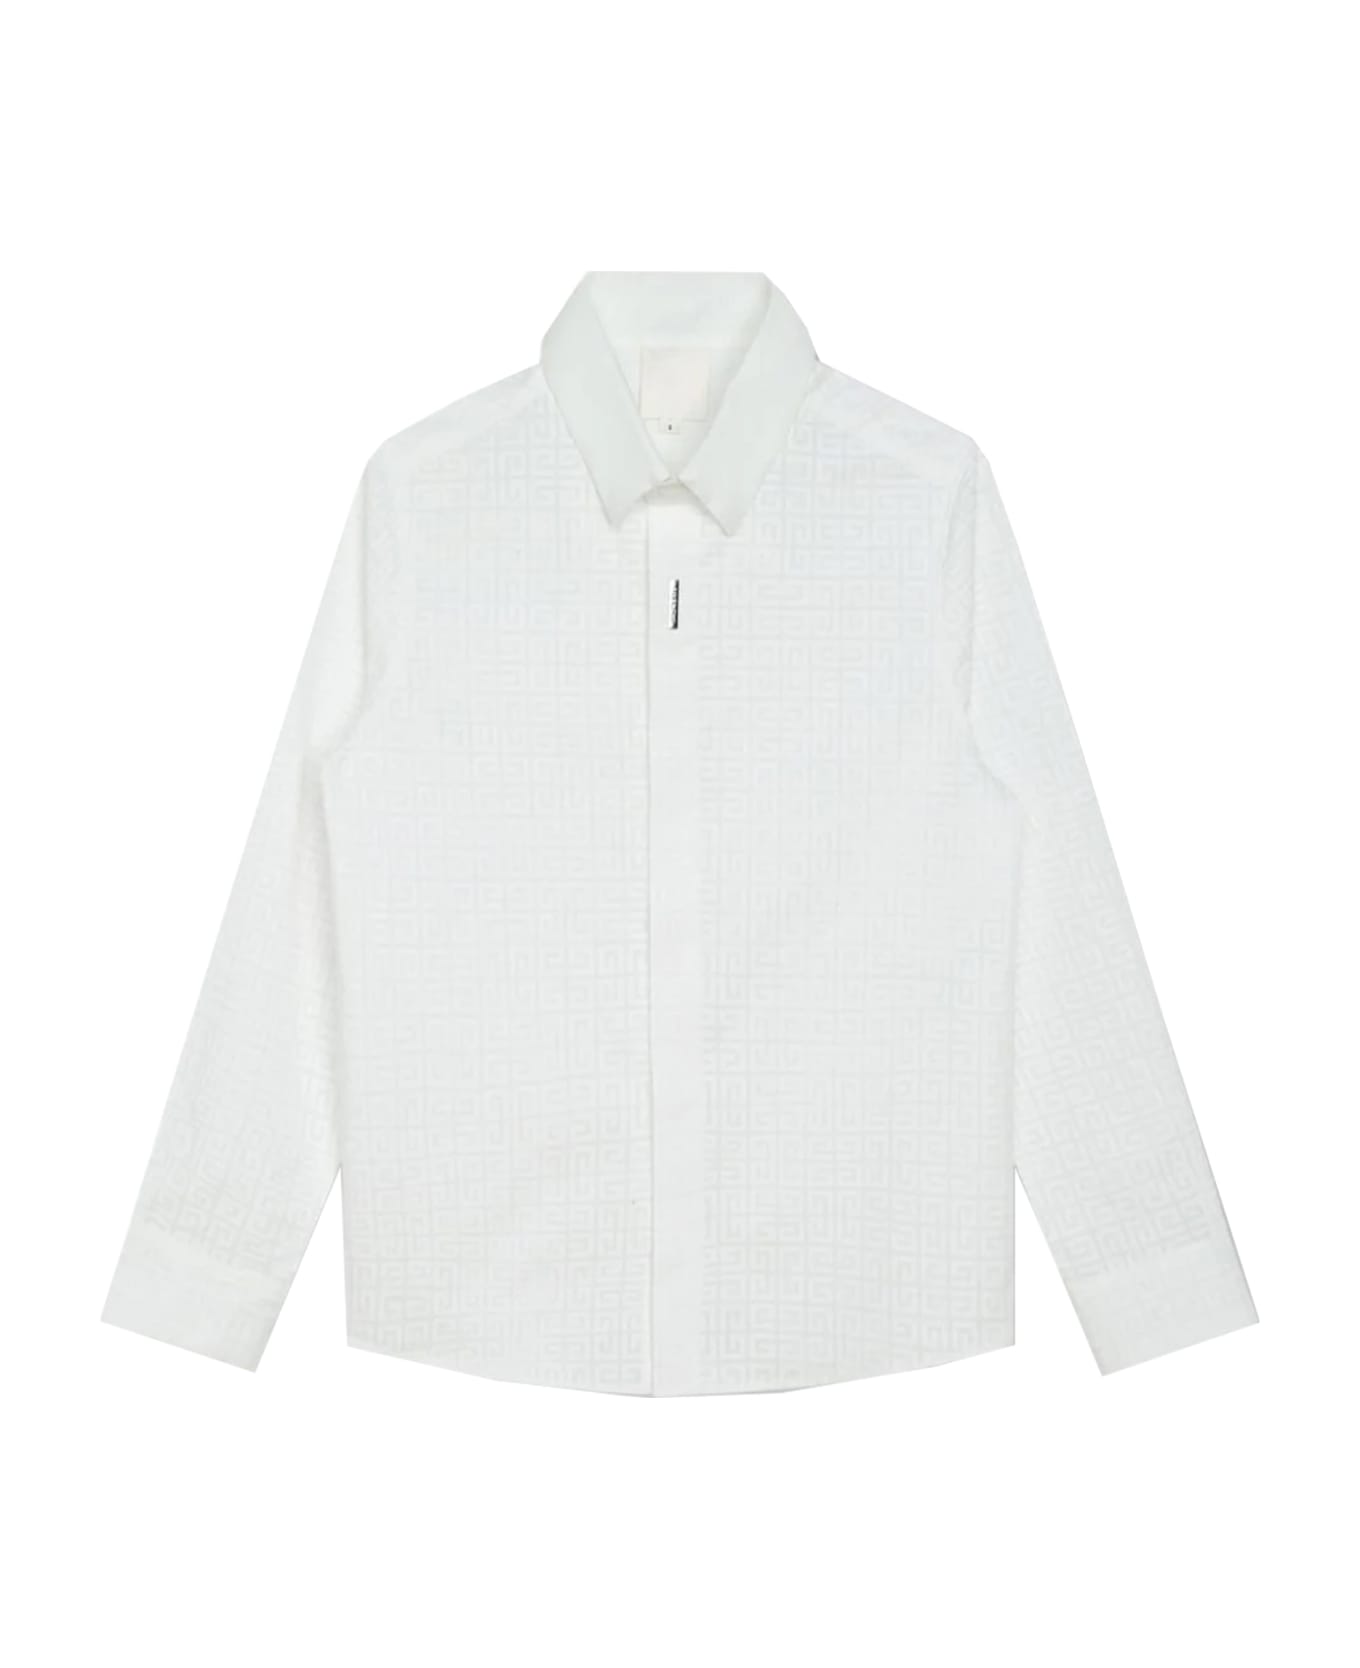 Givenchy top Shirt - White